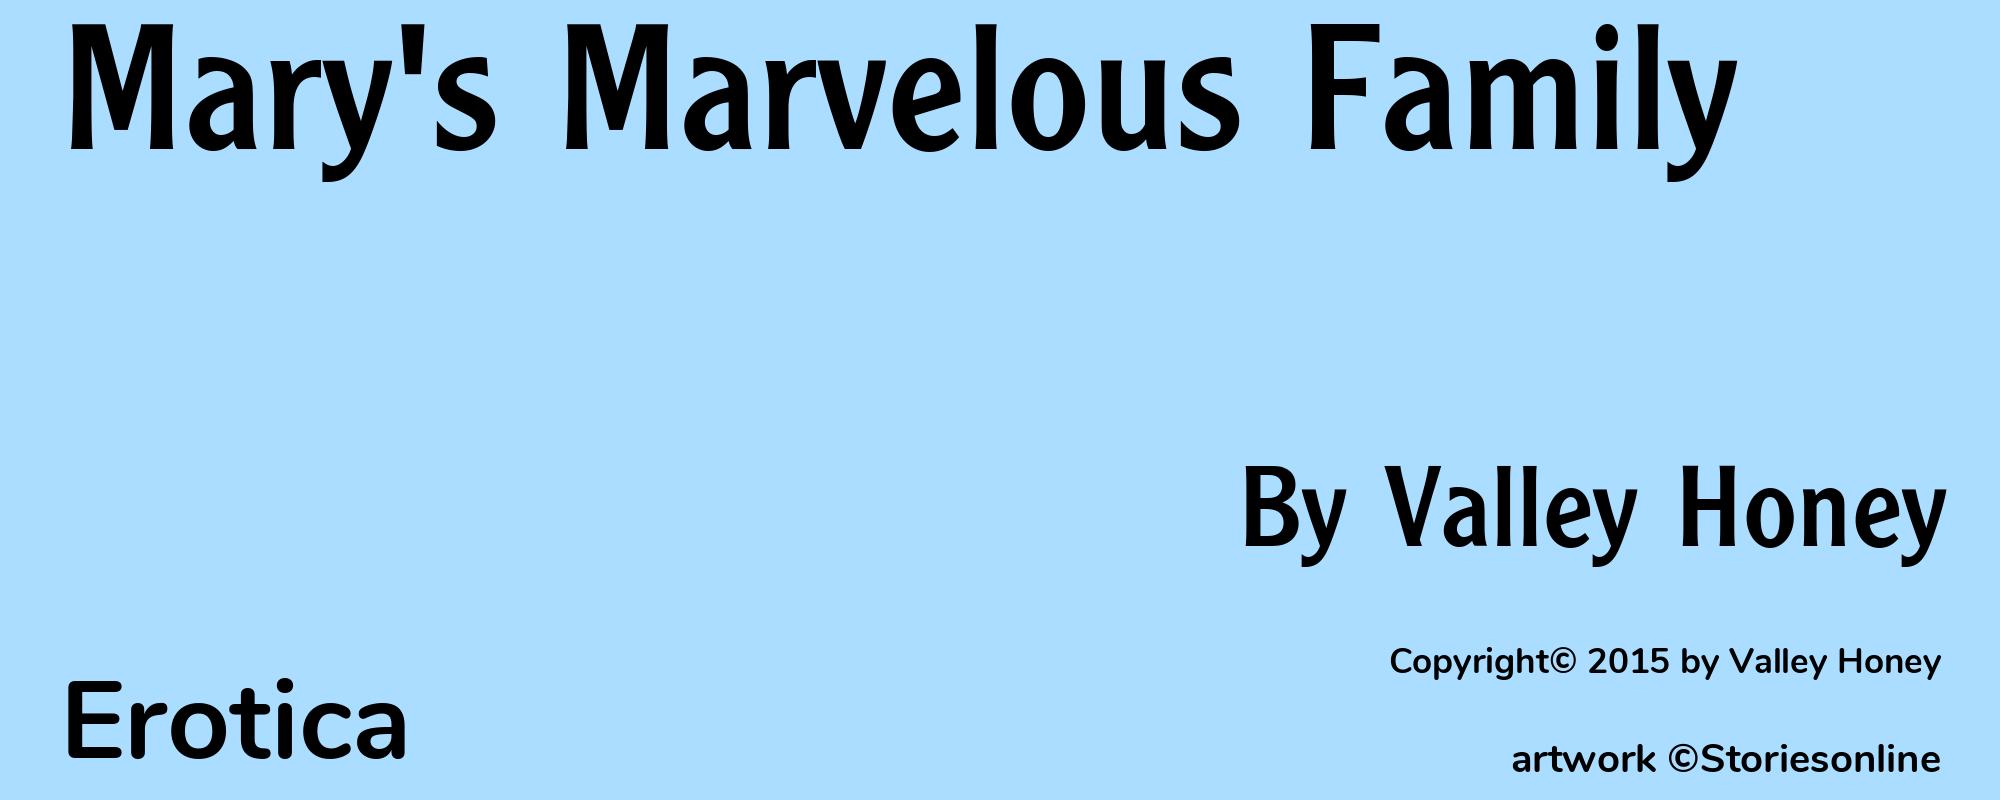 Mary's Marvelous Family - Cover